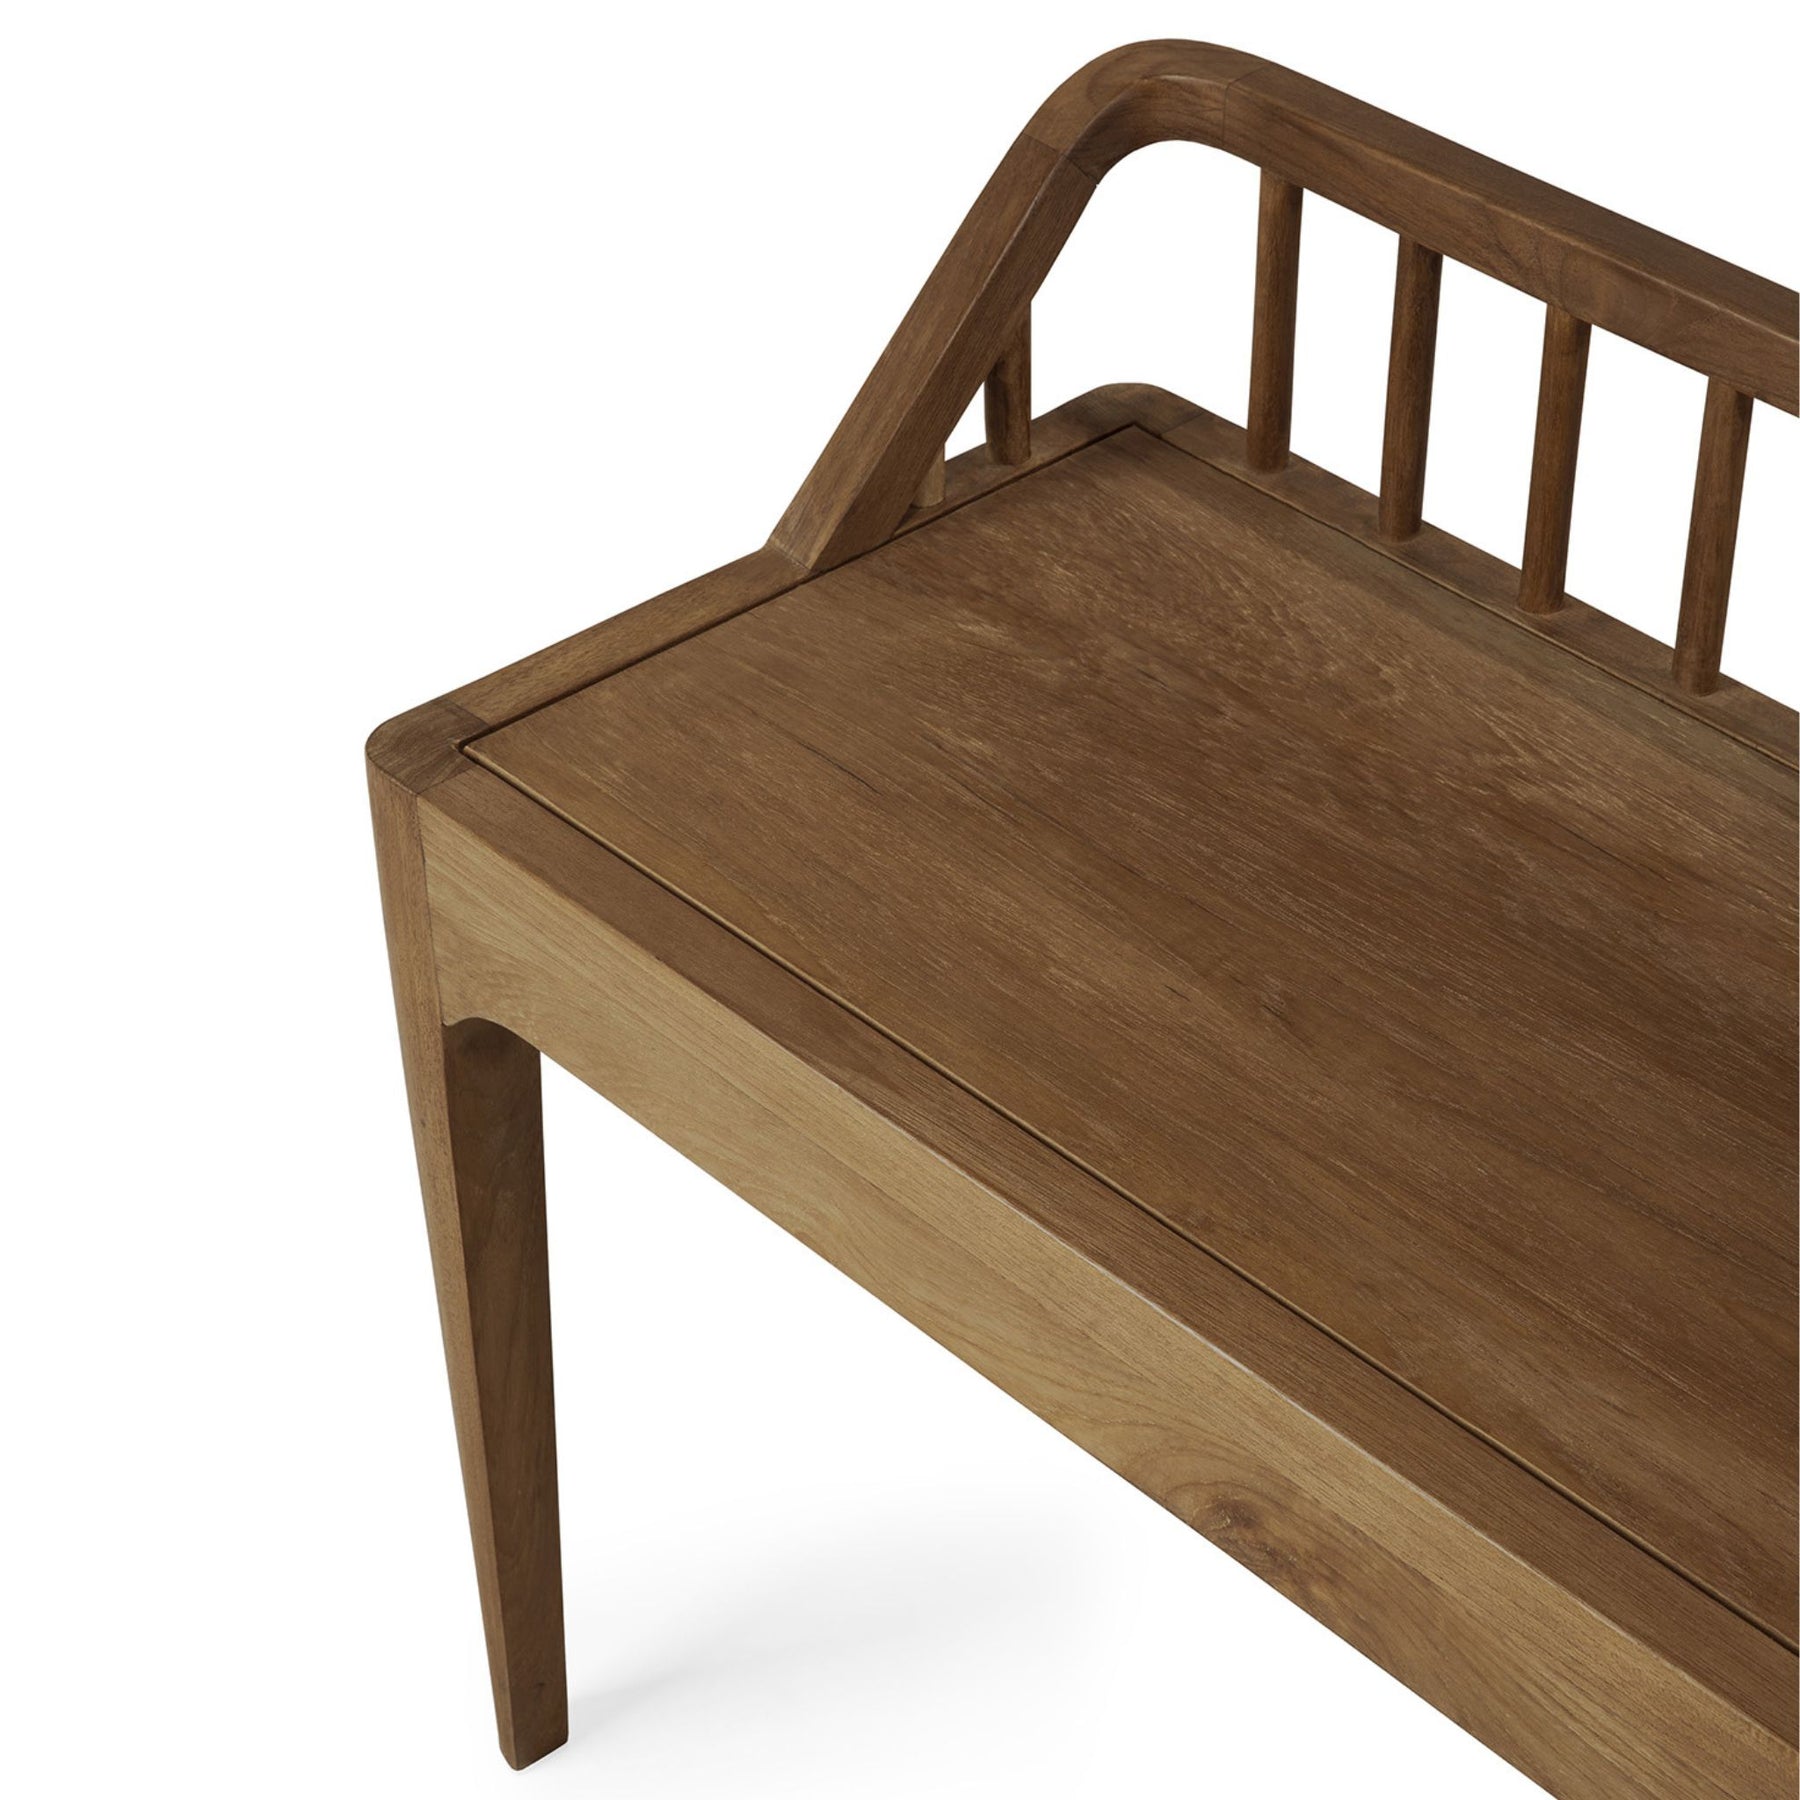 Ethnicraft Spindle Bench Reclaimed Teak Seat Detail